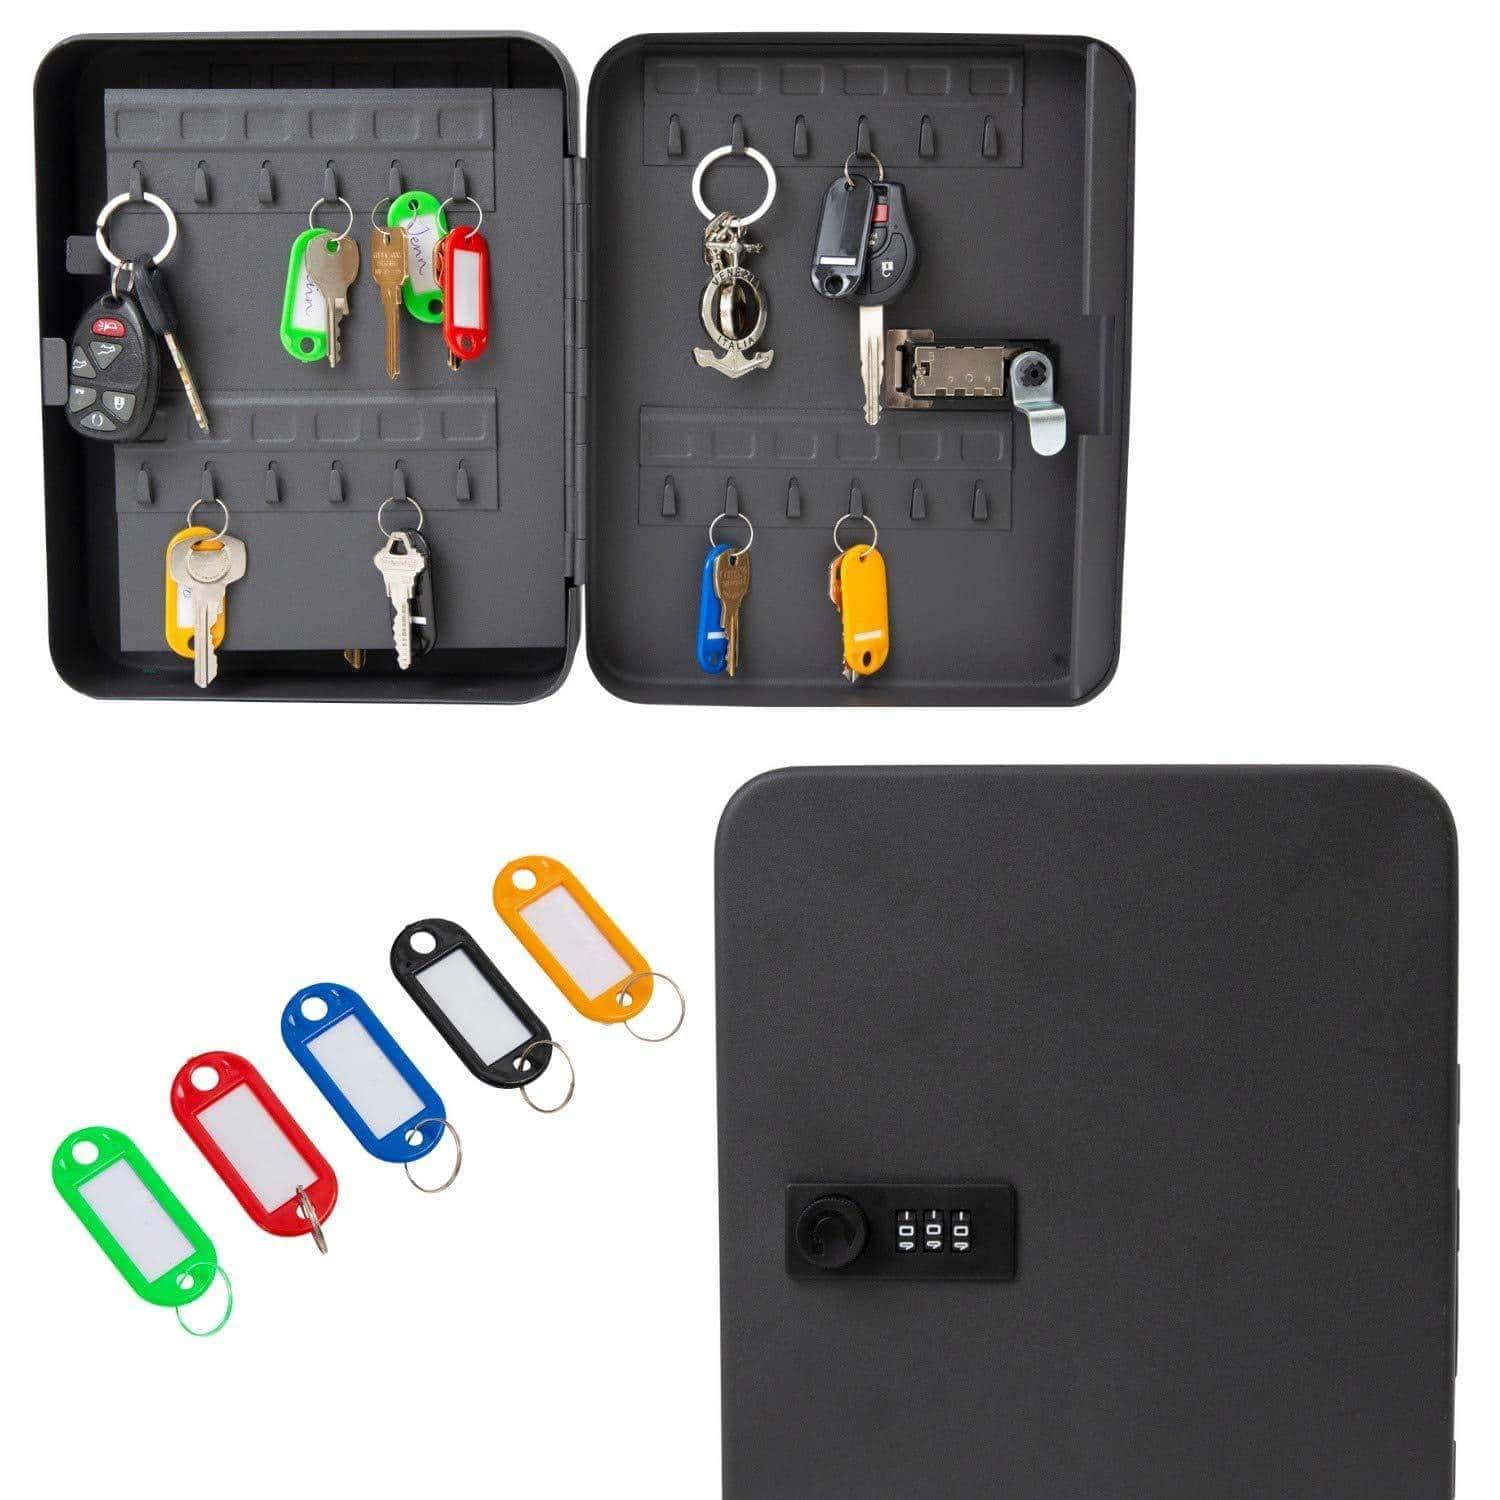 Purchase houseables key lock box lockbox cabinet wall mount safe 7 9 w x 9 9 l 48 tags black metal combination code locker storage organizer outdoor keybox closet for realtor real estate office